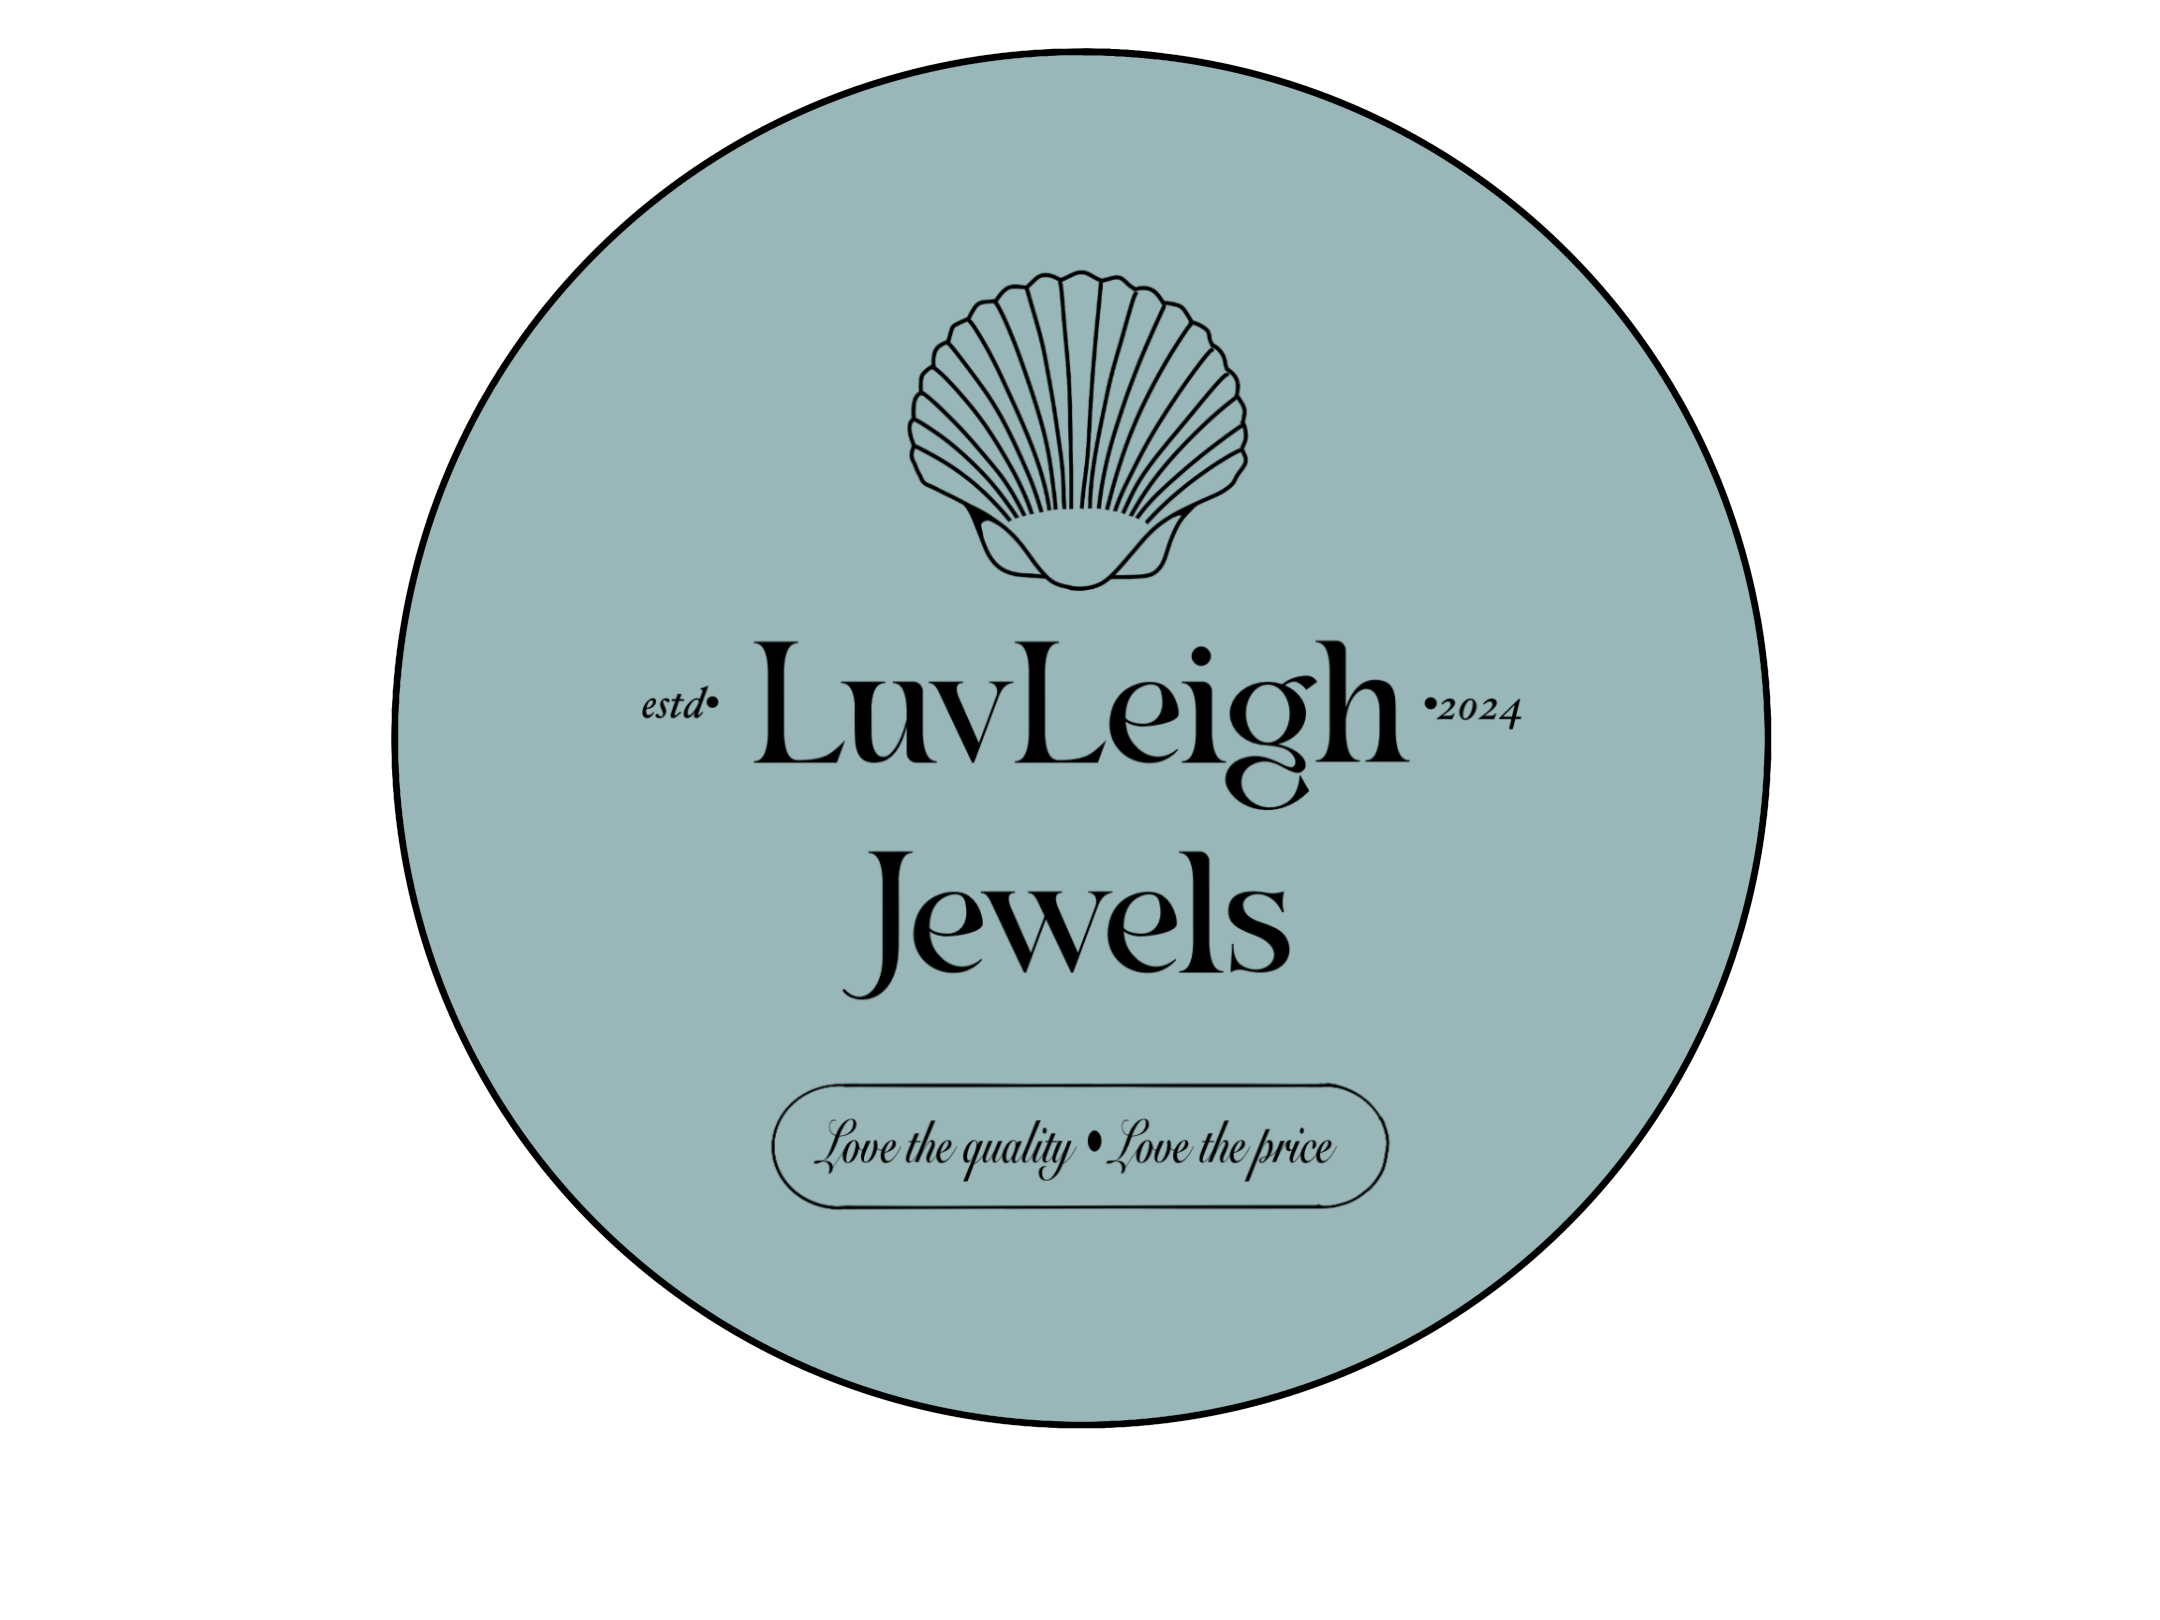 LuvLeighJewels